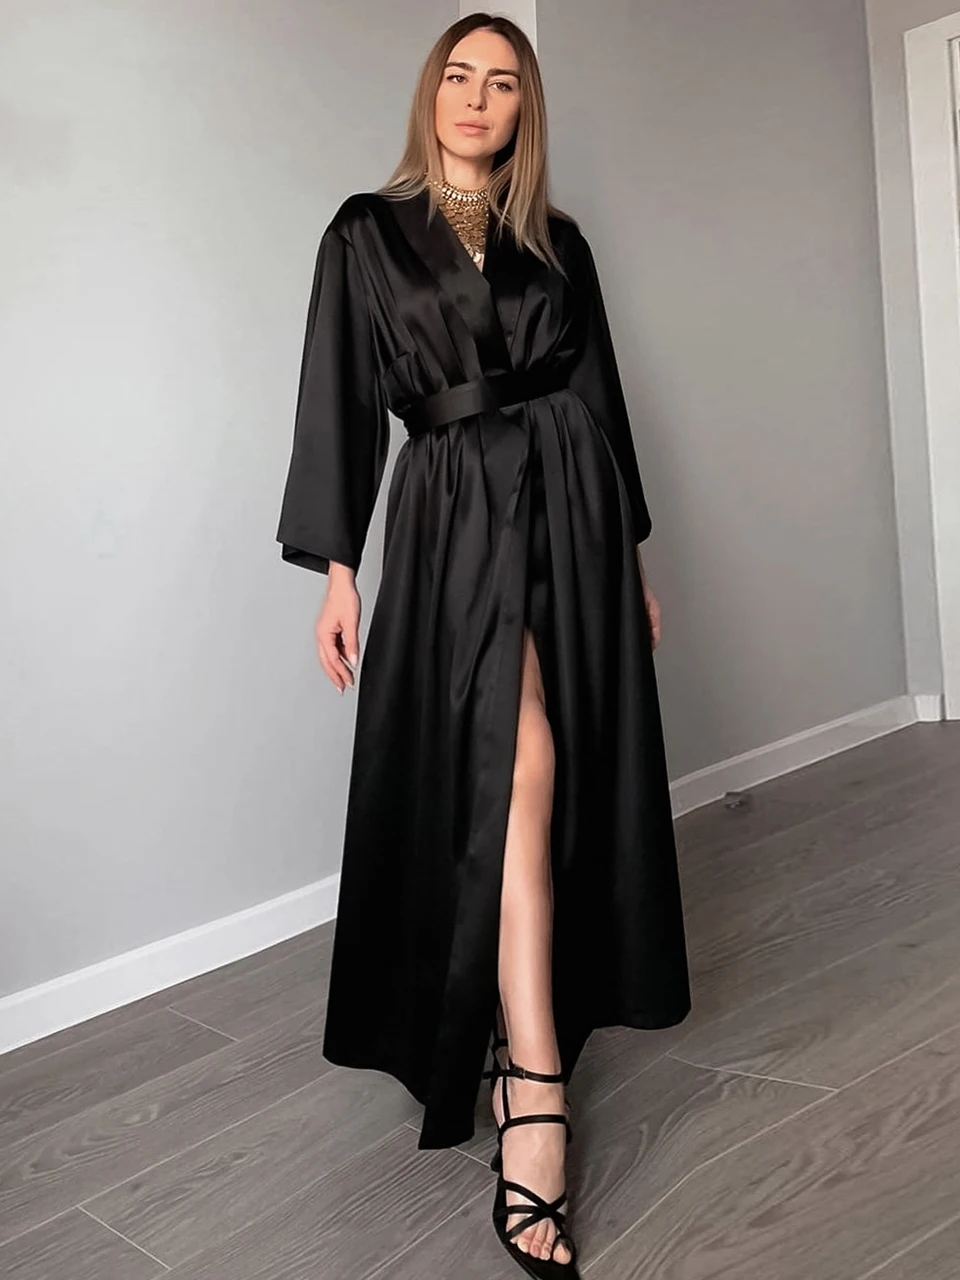 

Linad Black Loose Women's Dressing Gown V-Neck Robes Women Long Sleeves Pajamas Ankle-Length Bathrobe Female Solid Satin Pijama